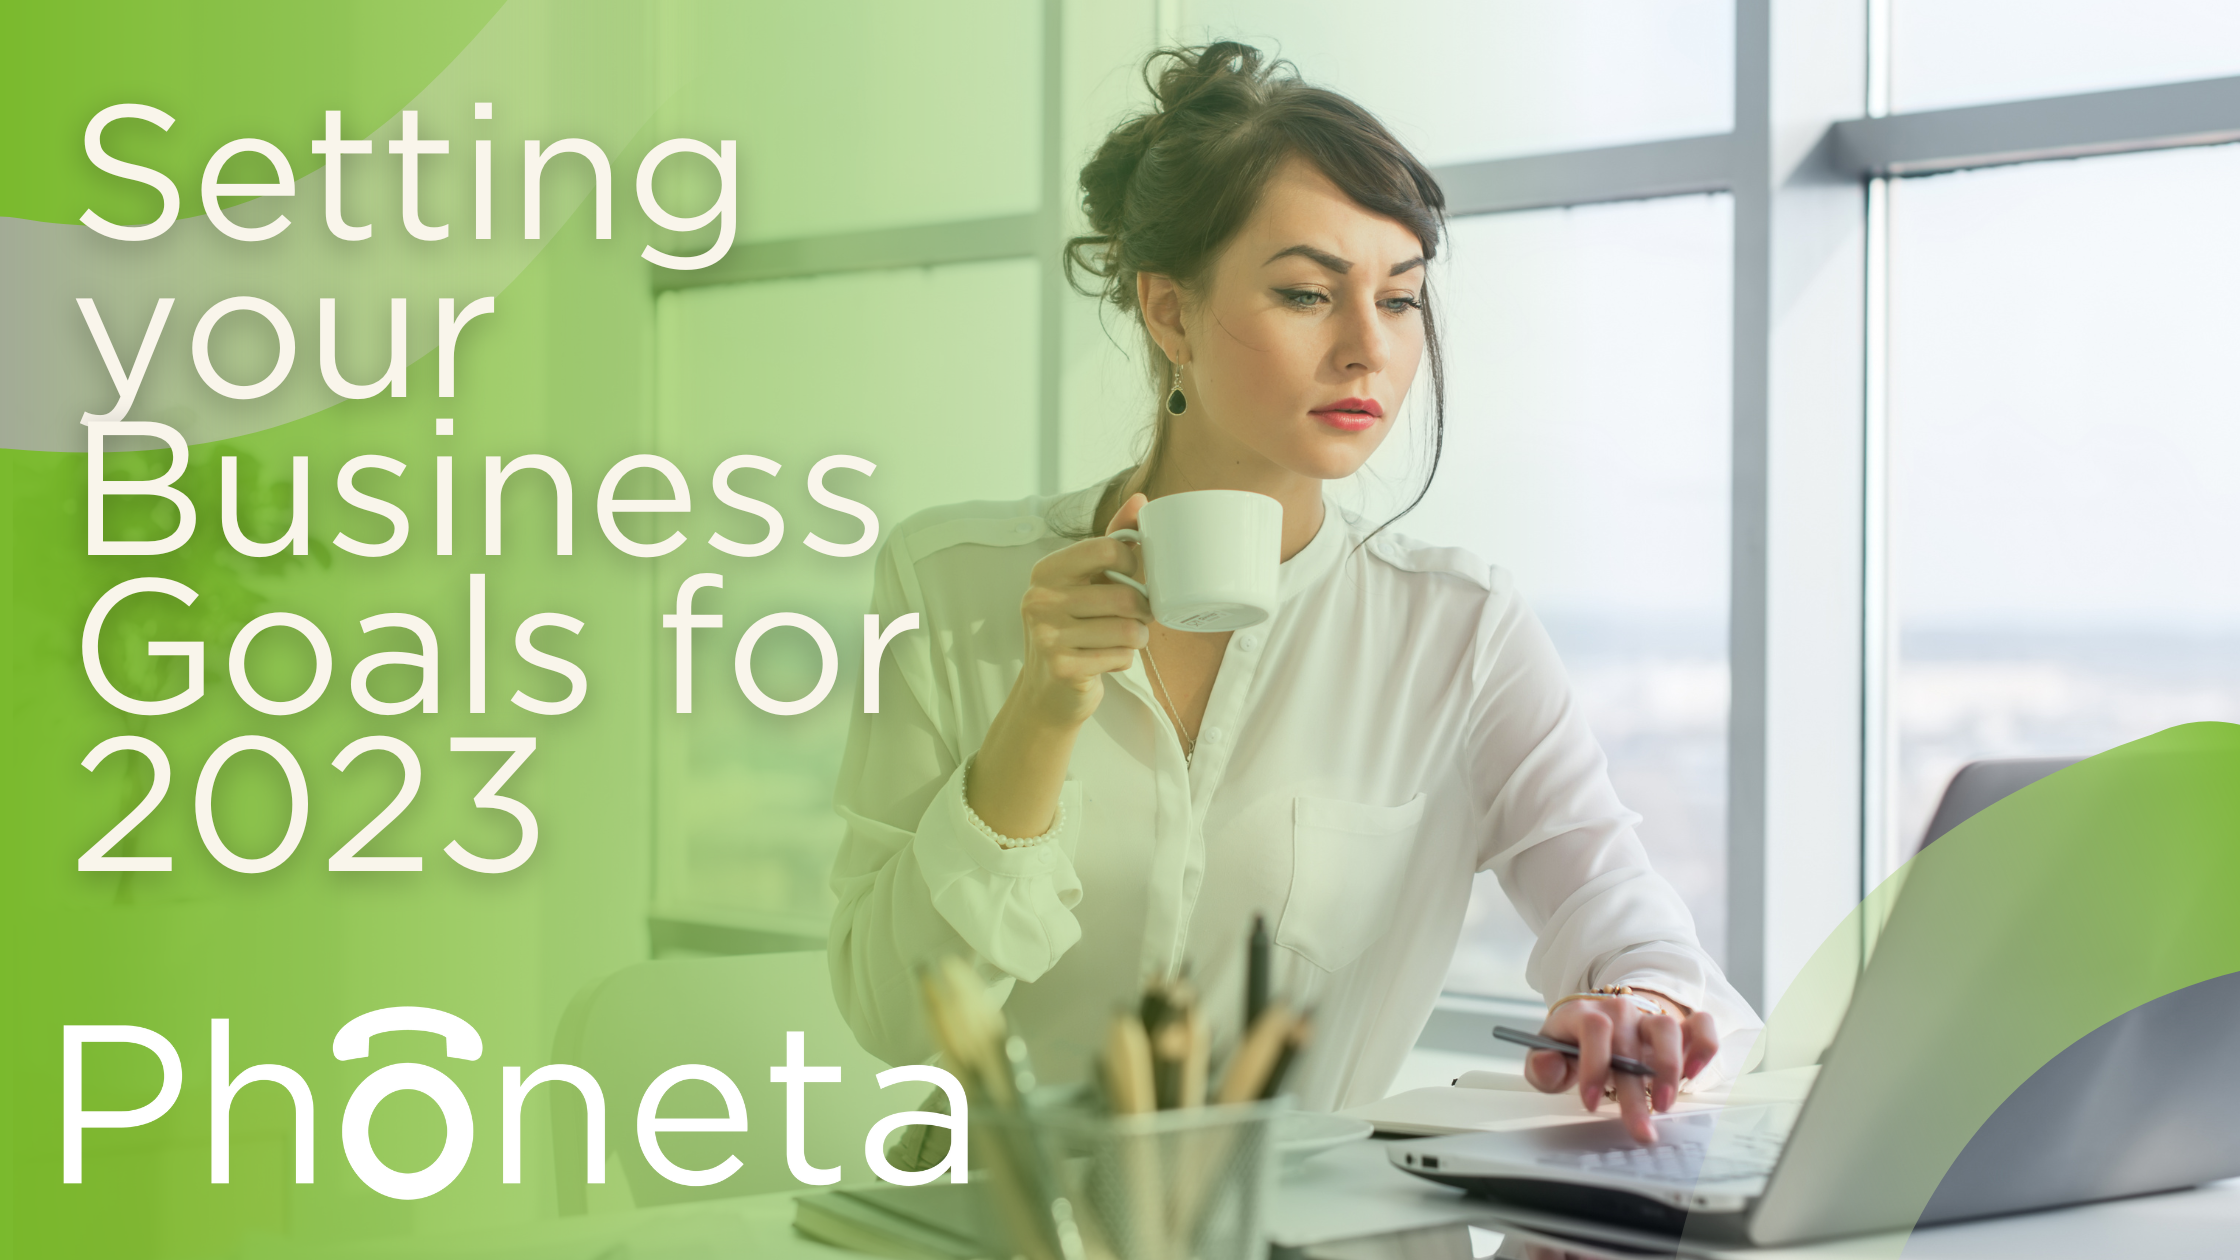 Setting your Business Goals for 2023